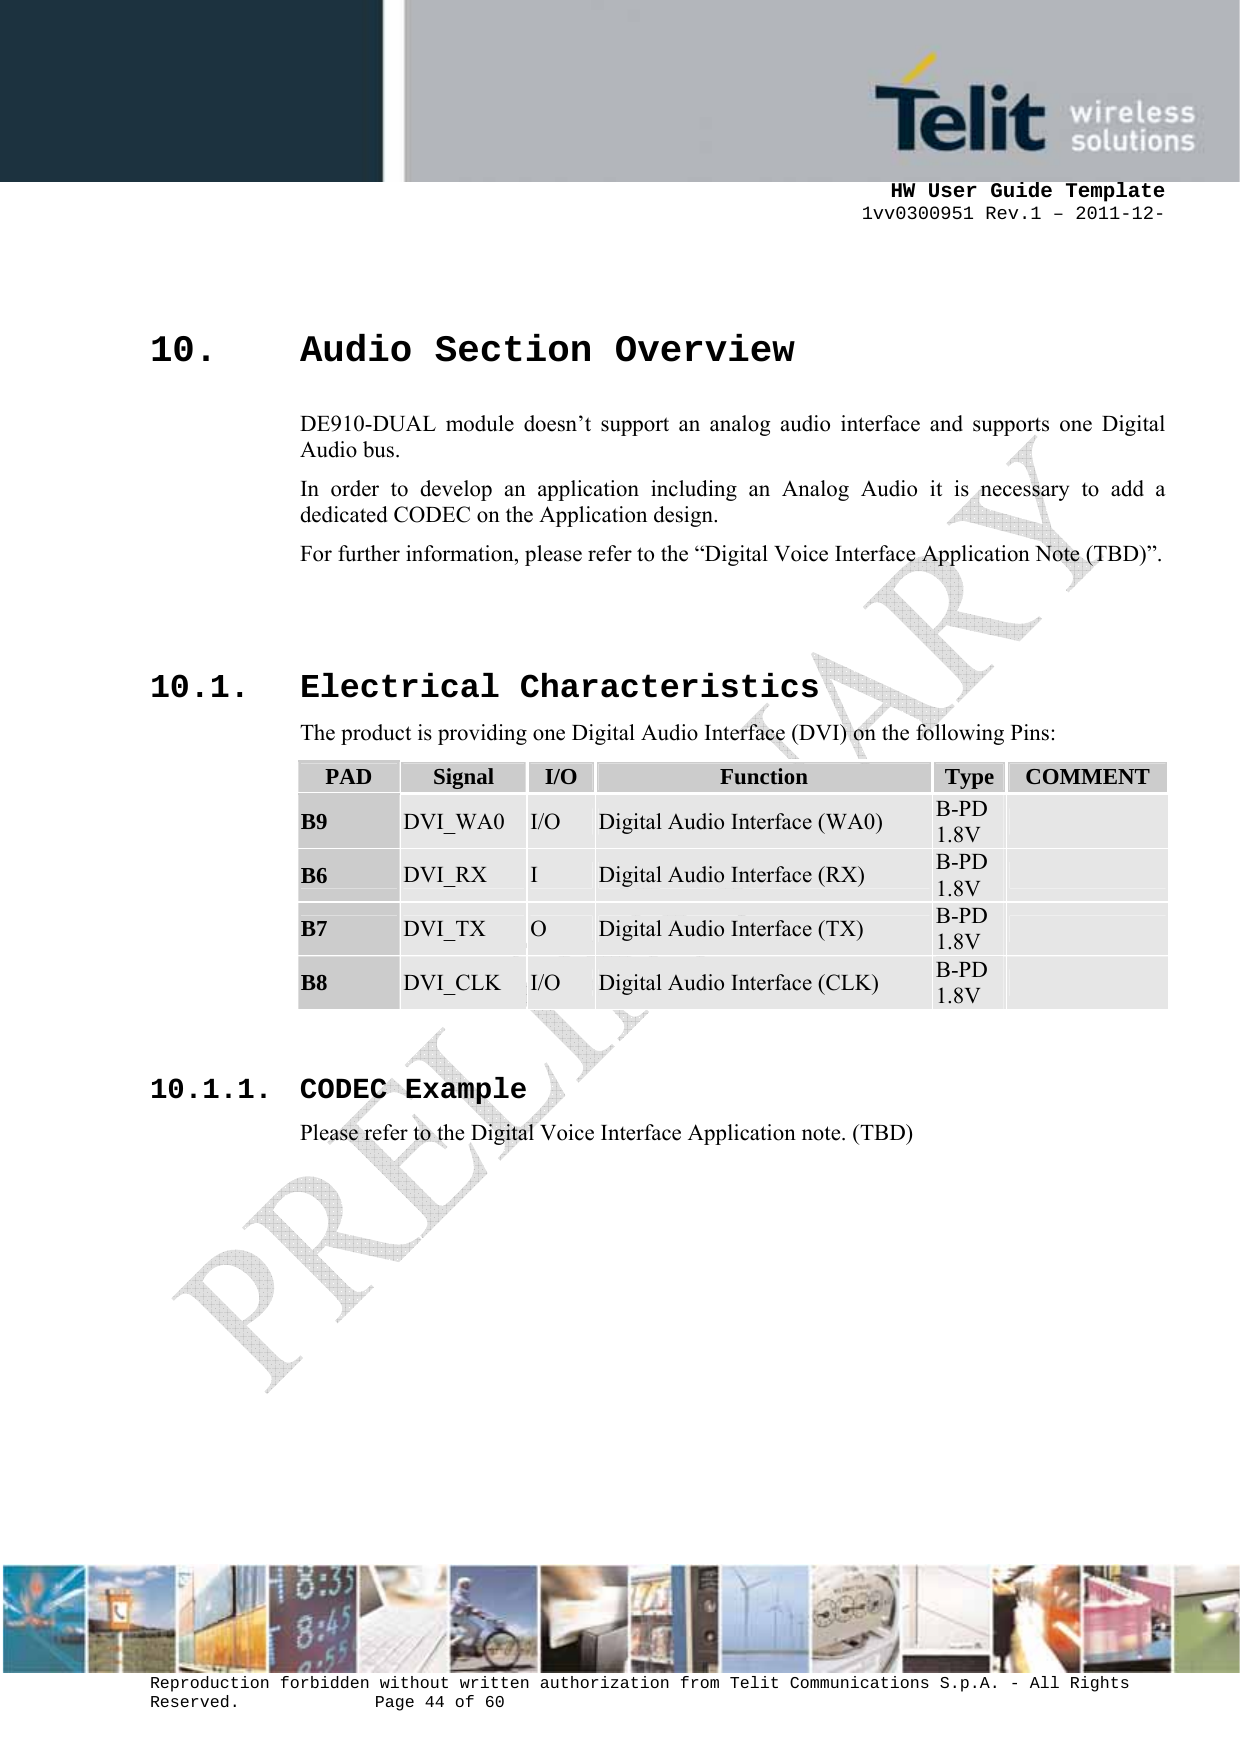      HW User Guide Template 1vv0300951 Rev.1 – 2011-12-  Reproduction forbidden without written authorization from Telit Communications S.p.A. - All Rights Reserved.    Page 44 of 60                                                     10. Audio Section Overview DE910-DUAL module doesn’t support an analog audio interface and supports one Digital Audio bus.  In order to develop an application including an Analog Audio it is necessary to add a dedicated CODEC on the Application design. For further information, please refer to the “Digital Voice Interface Application Note (TBD)”.   10.1. Electrical Characteristics The product is providing one Digital Audio Interface (DVI) on the following Pins: PAD  Signal  I/O Function  Type  COMMENTB9  DVI_WA0  I/O  Digital Audio Interface (WA0)  B-PD 1.8V   B6  DVI_RX  I  Digital Audio Interface (RX)  B-PD 1.8V   B7  DVI_TX  O  Digital Audio Interface (TX)  B-PD 1.8V   B8  DVI_CLK  I/O  Digital Audio Interface (CLK)  B-PD 1.8V    10.1.1. CODEC Example Please refer to the Digital Voice Interface Application note. (TBD)    